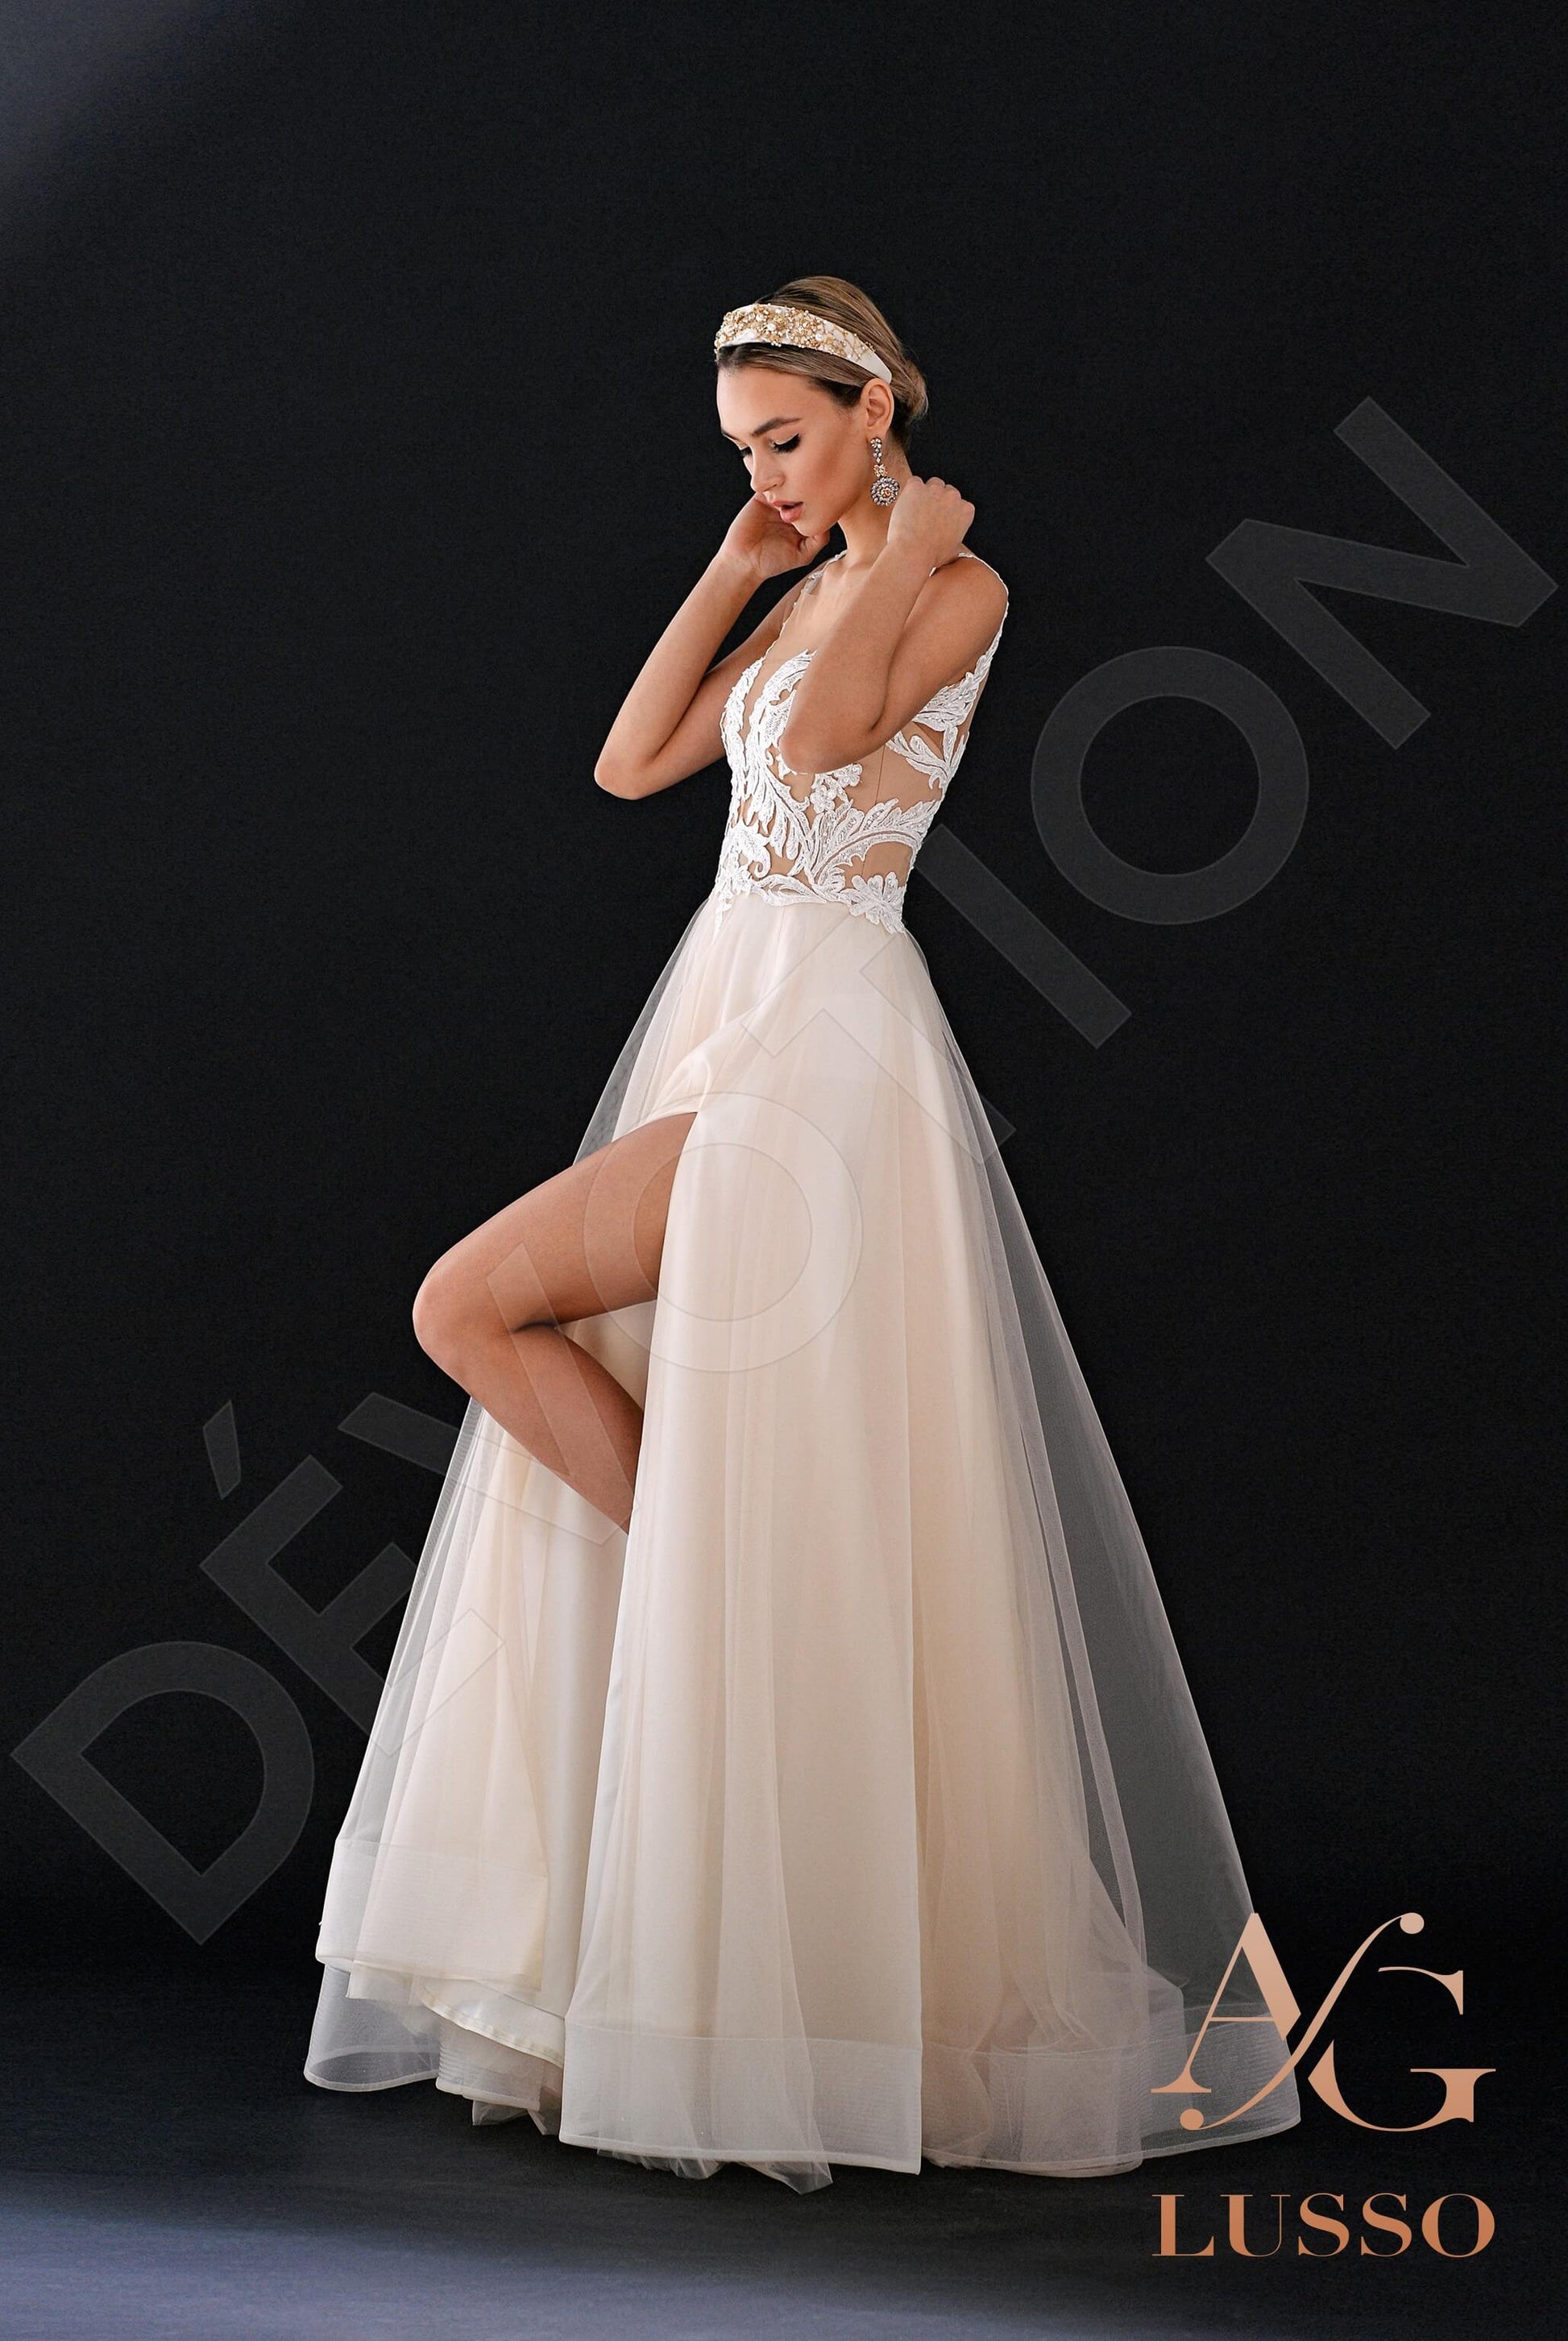 Deny A-line Illusion Cappuccino Ivory Wedding dress